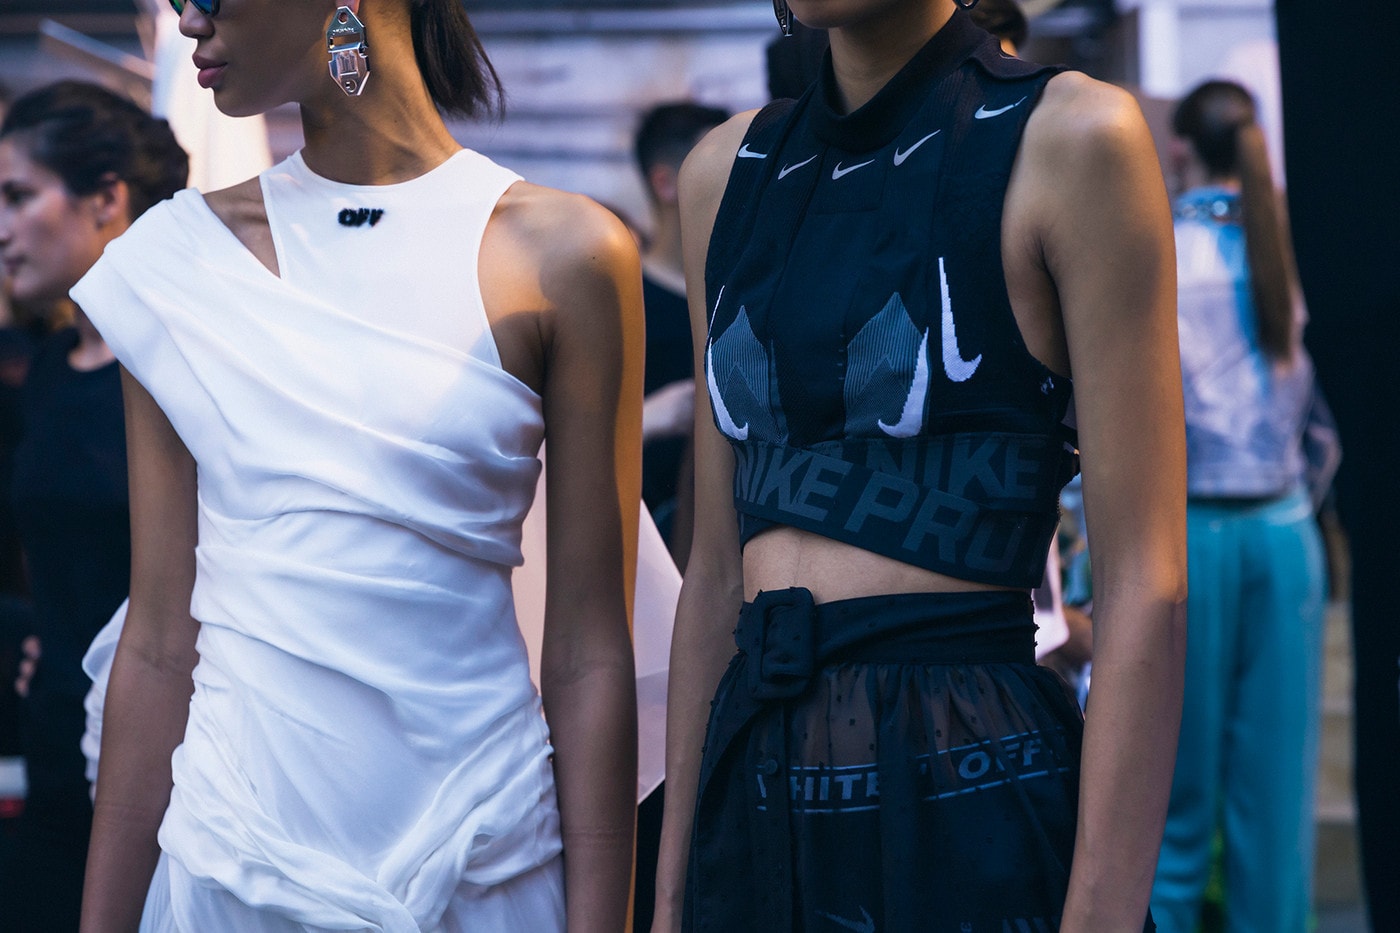 End-of-Summer Nike Sale 2019: Leggings, Sports Bras, and More